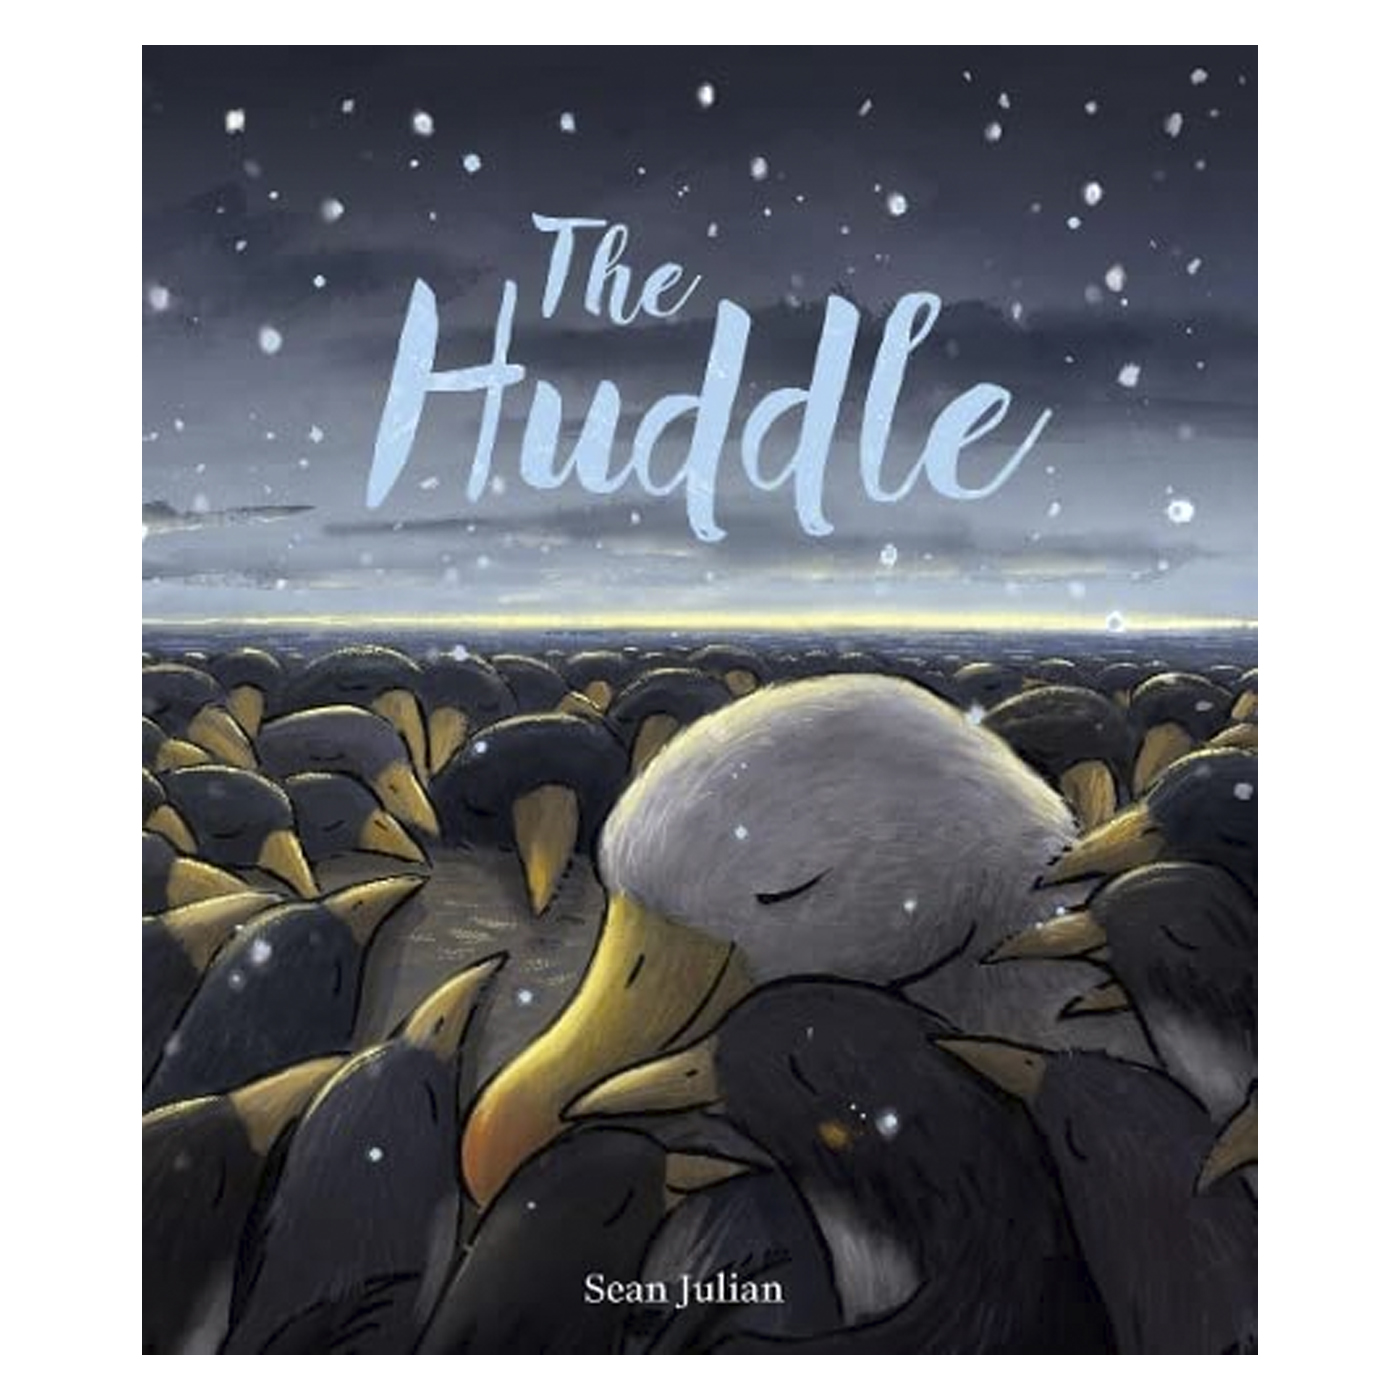 OXFORD CHILDRENS BOOK The Huddle